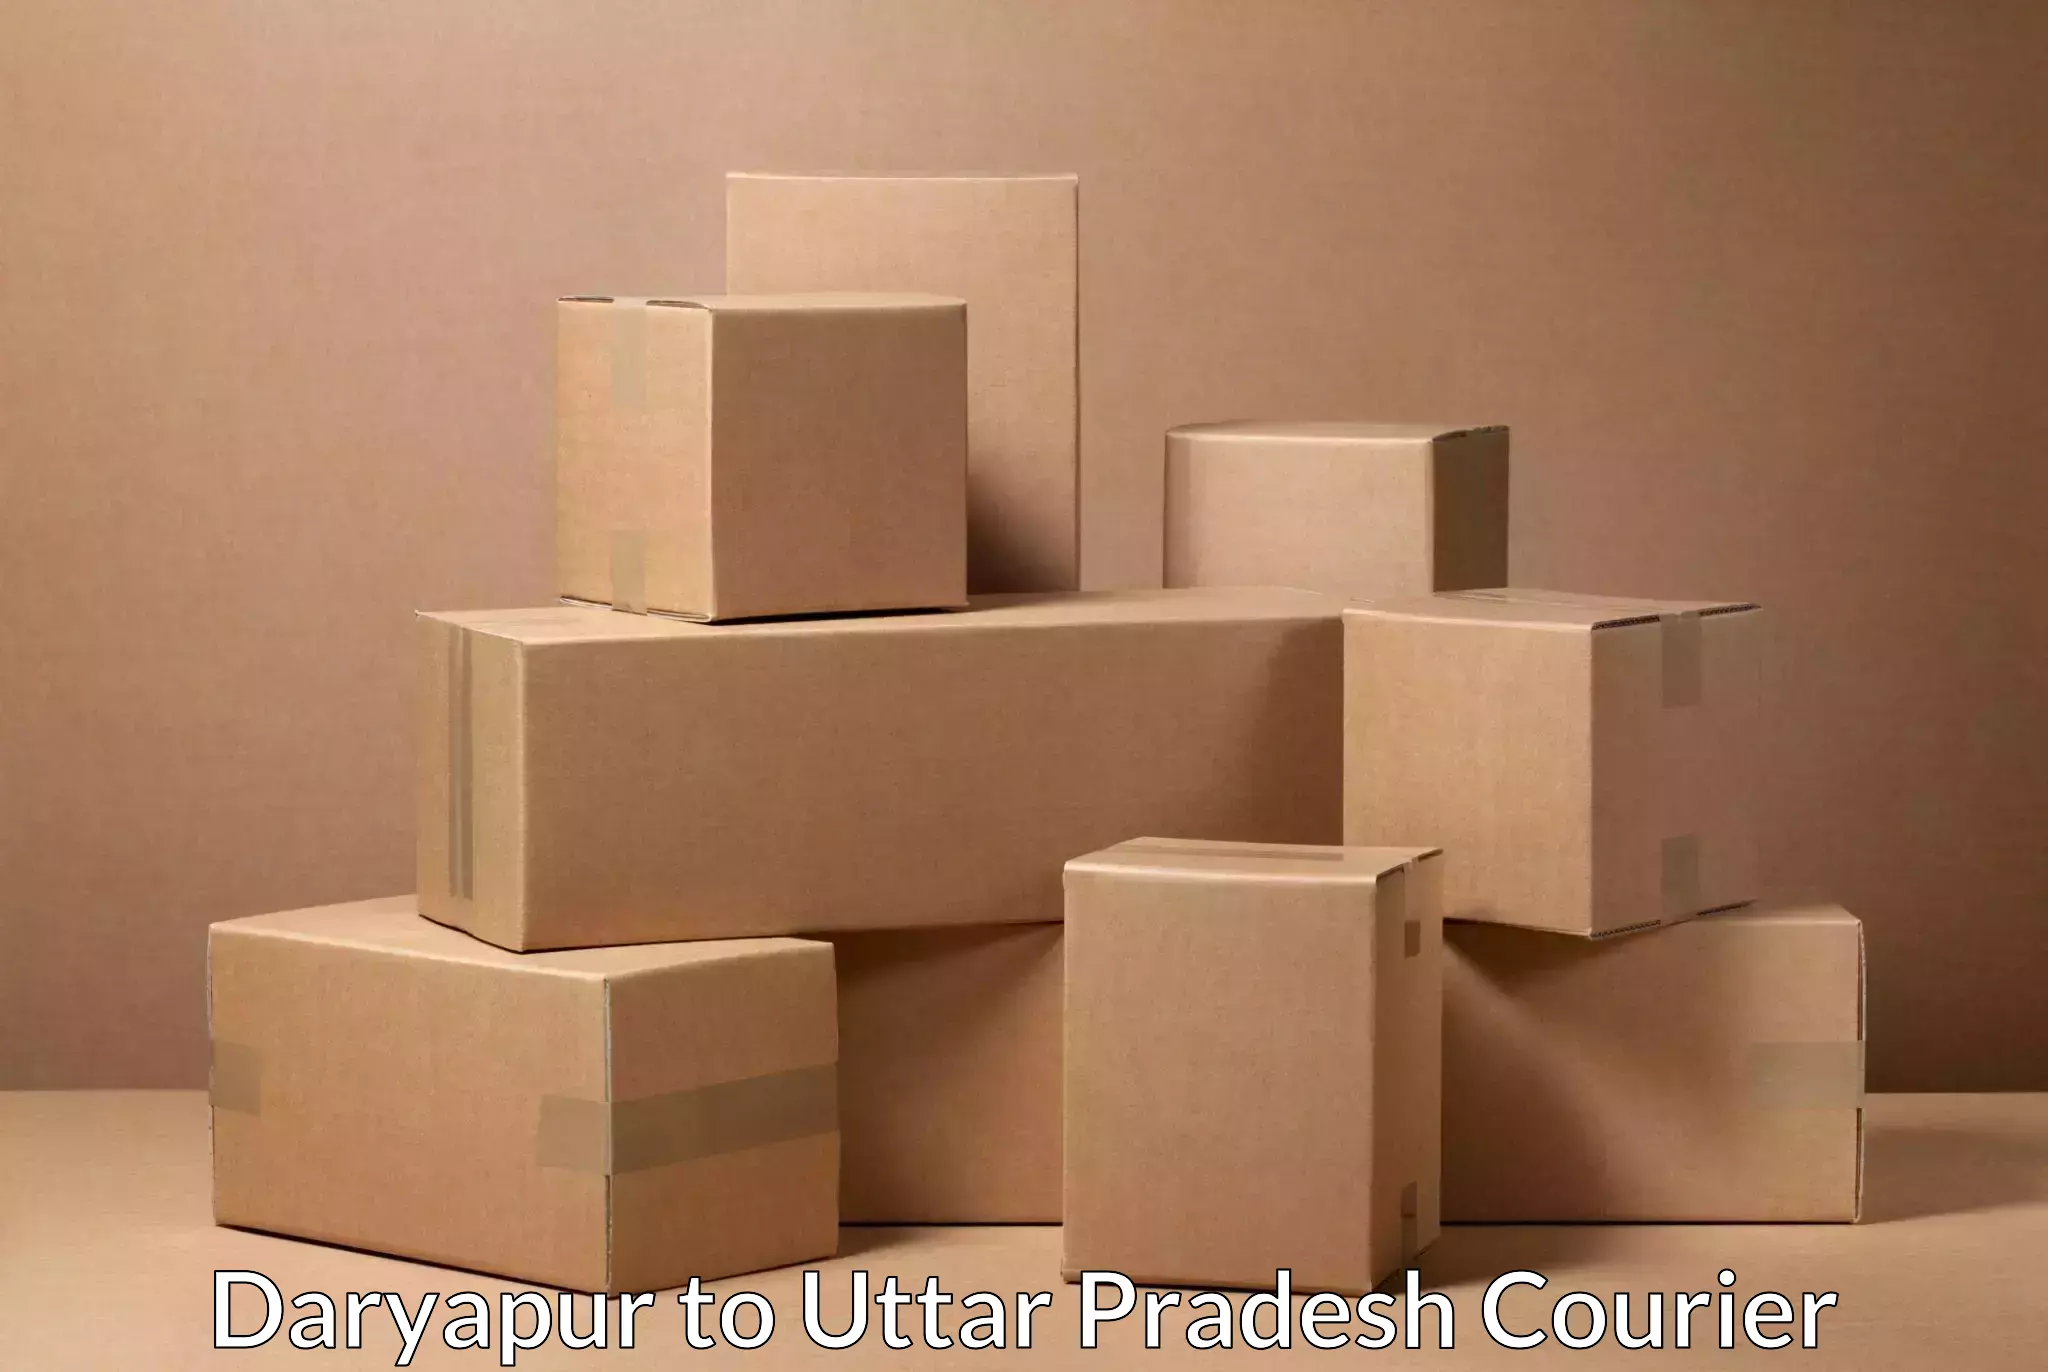 Courier service innovation Daryapur to Aligarh